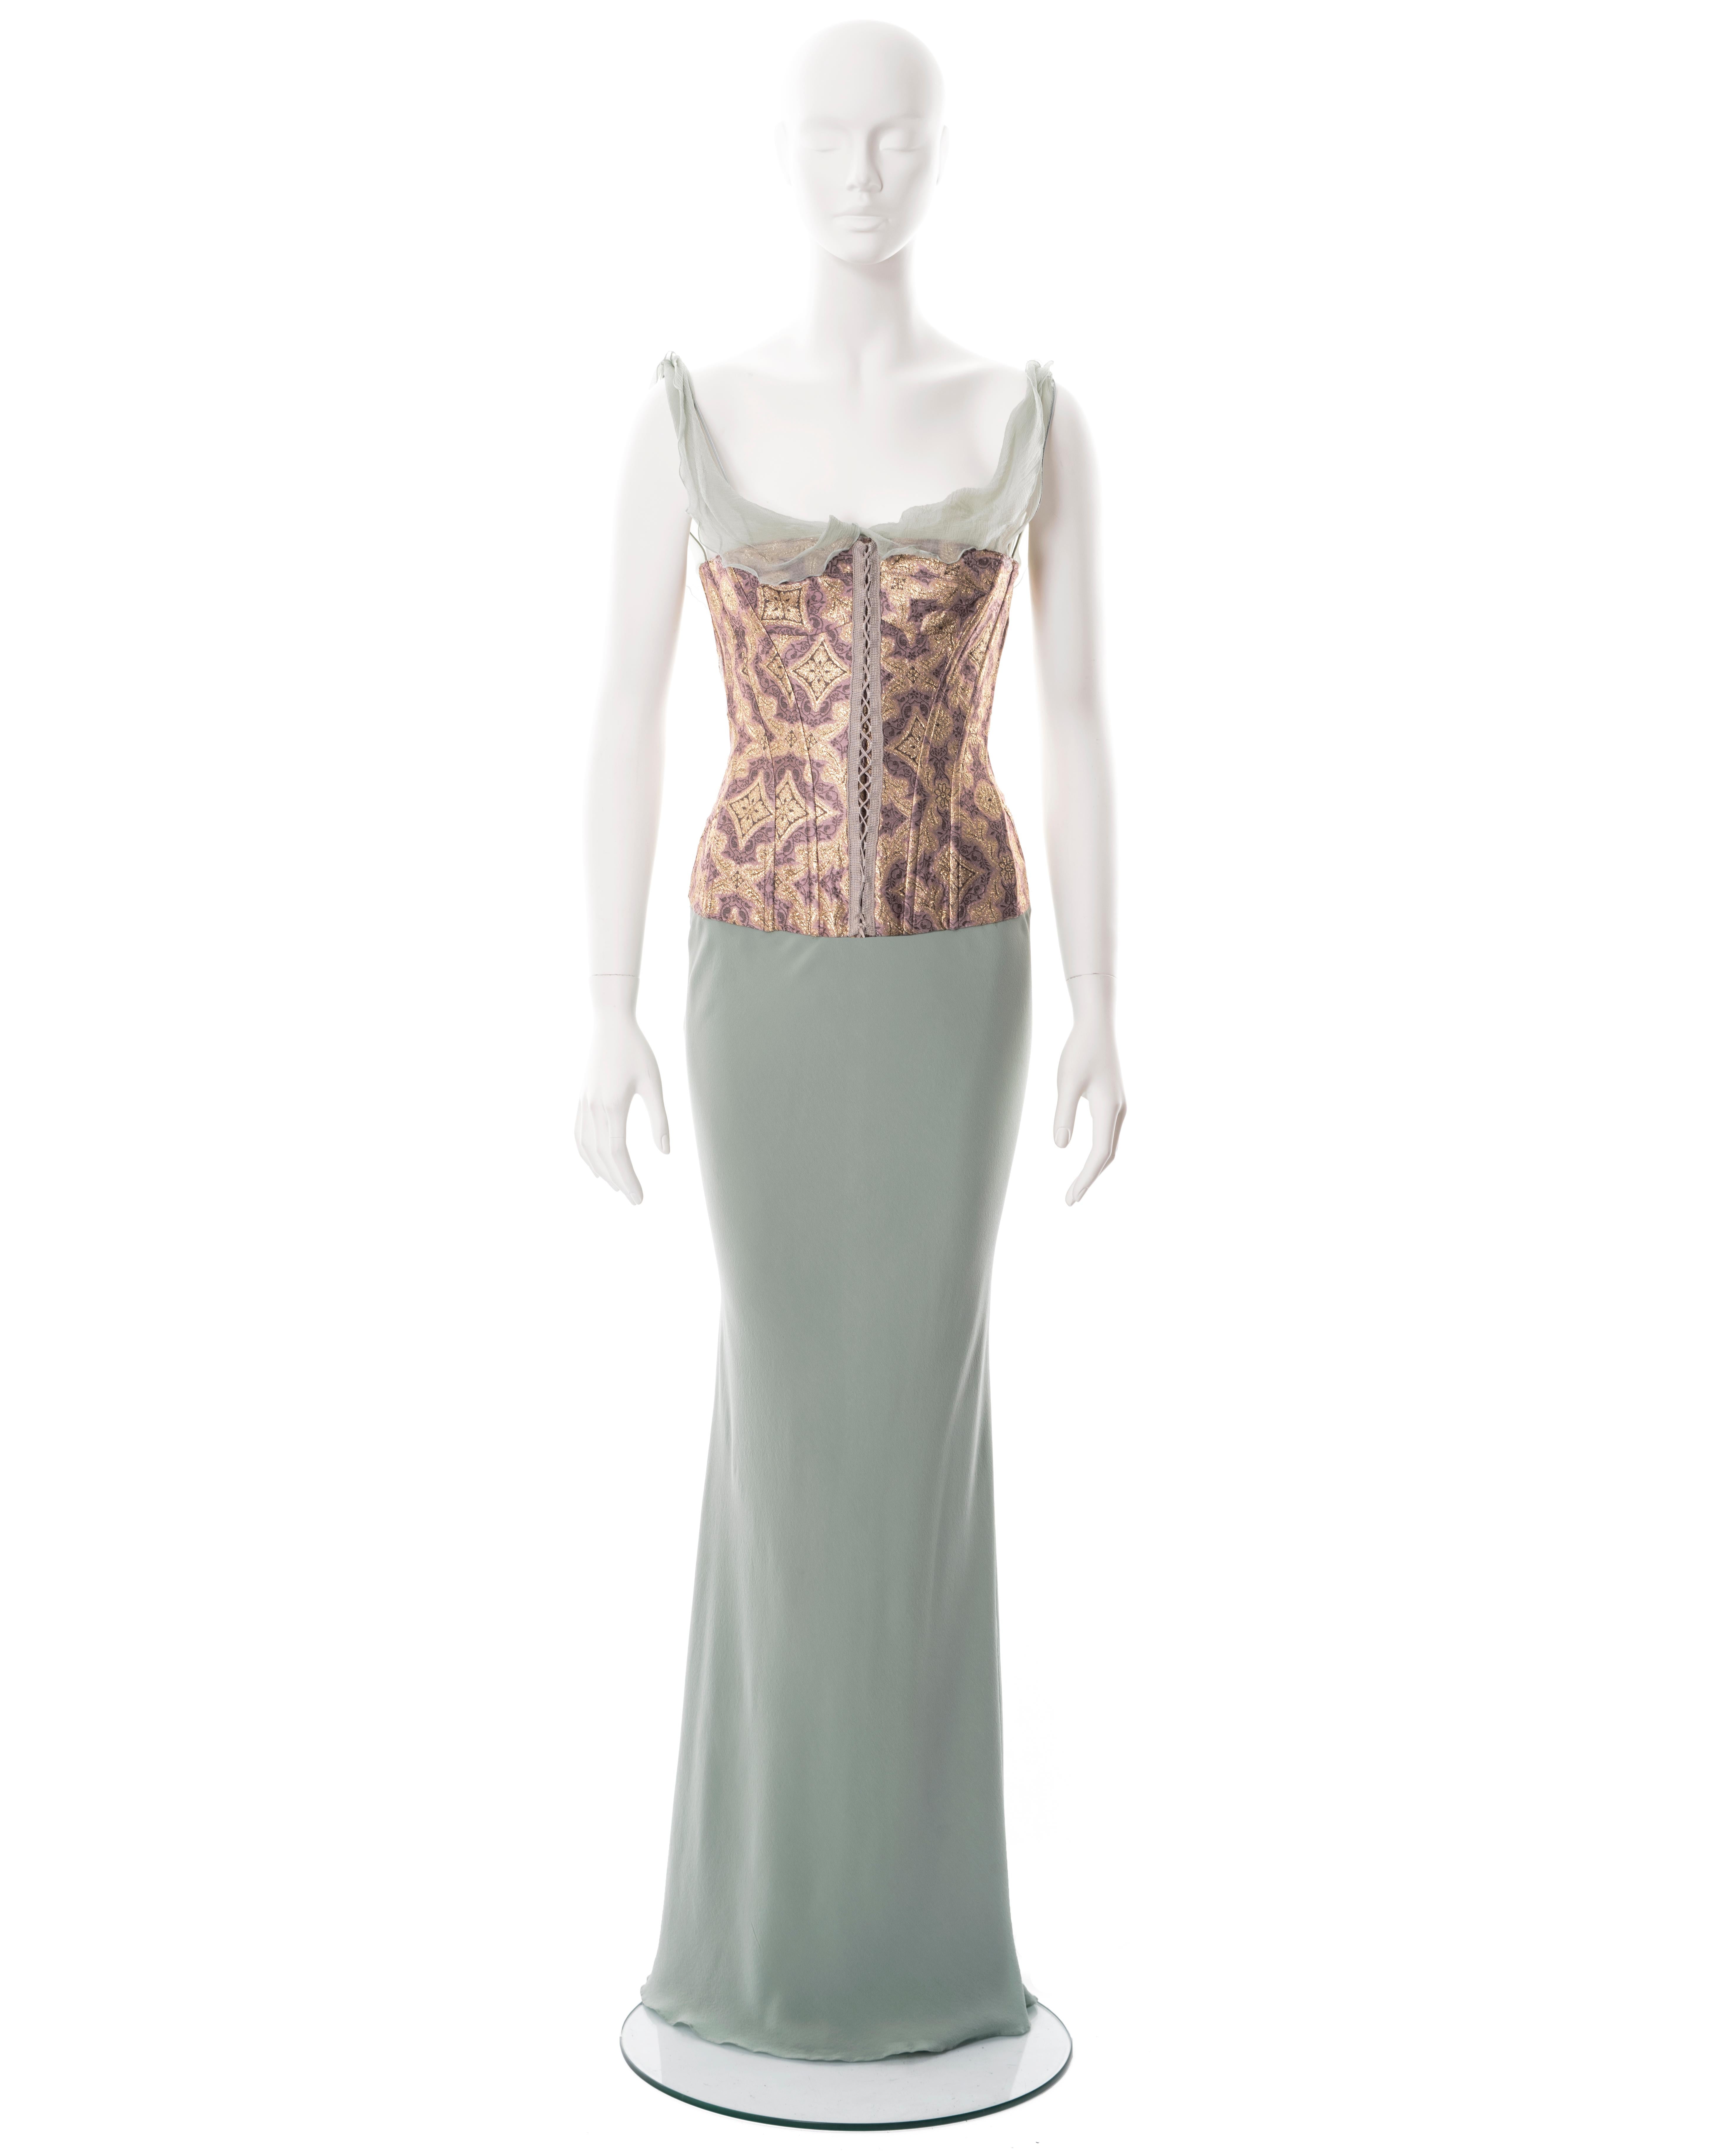 ▪ John Galliano evening dress
▪ Sold by One of a Kind Archive
▪ Spring-Summer 2003
▪ Constructed from pale teal bias-cut silk 
▪ Integrated corset of metallic gold and lavender brocade 
▪ Lace-up fastening 
▪ Draped chiffon cowl and shoulder straps